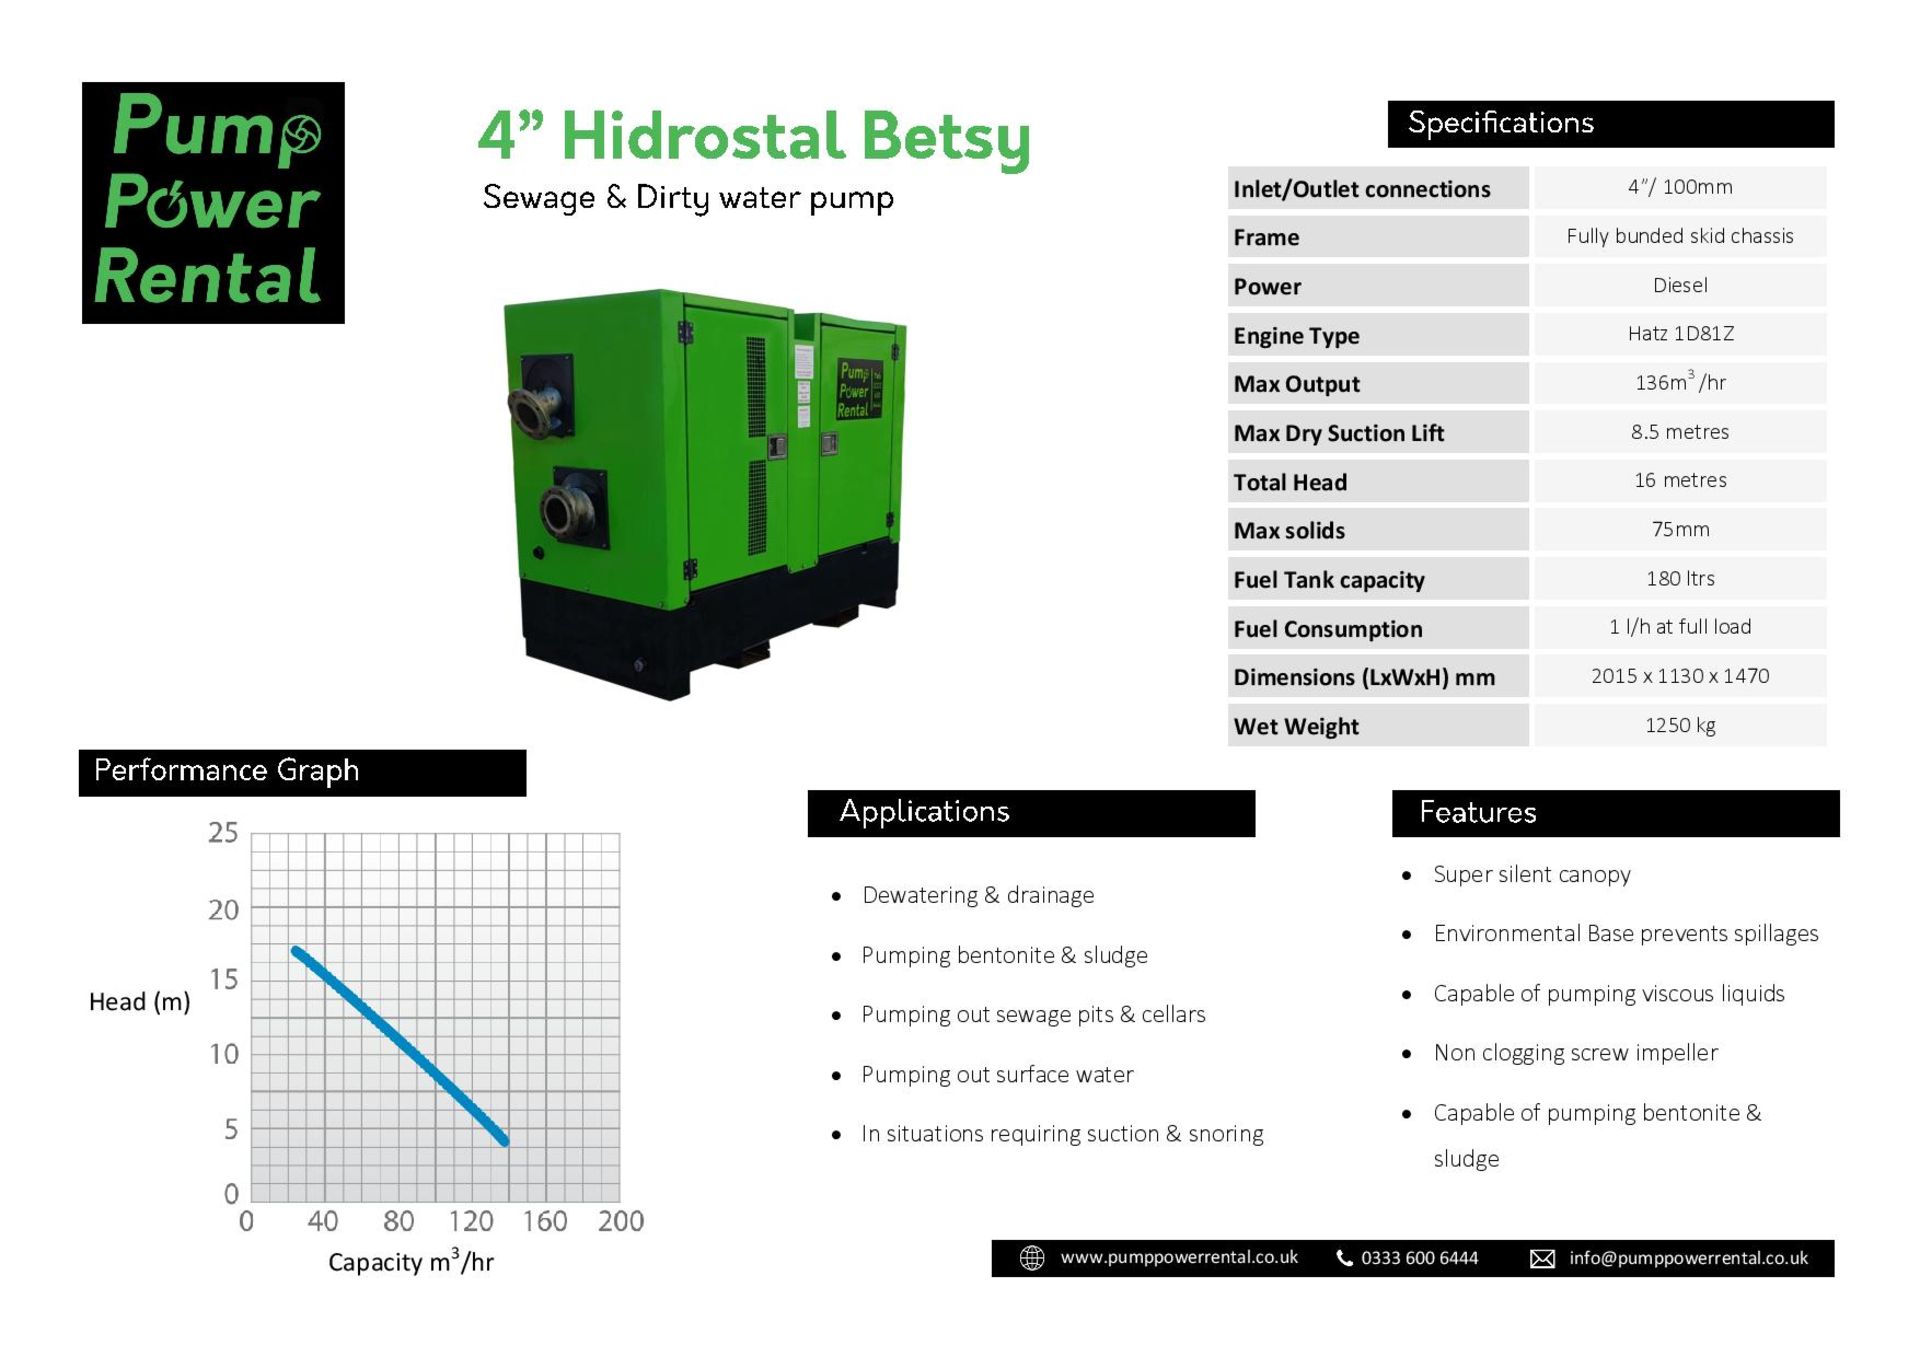 Hidrostal Betsy 4"" Sewage & Dirty Water Solids Handling Pump | Ref: A061 - Image 13 of 13